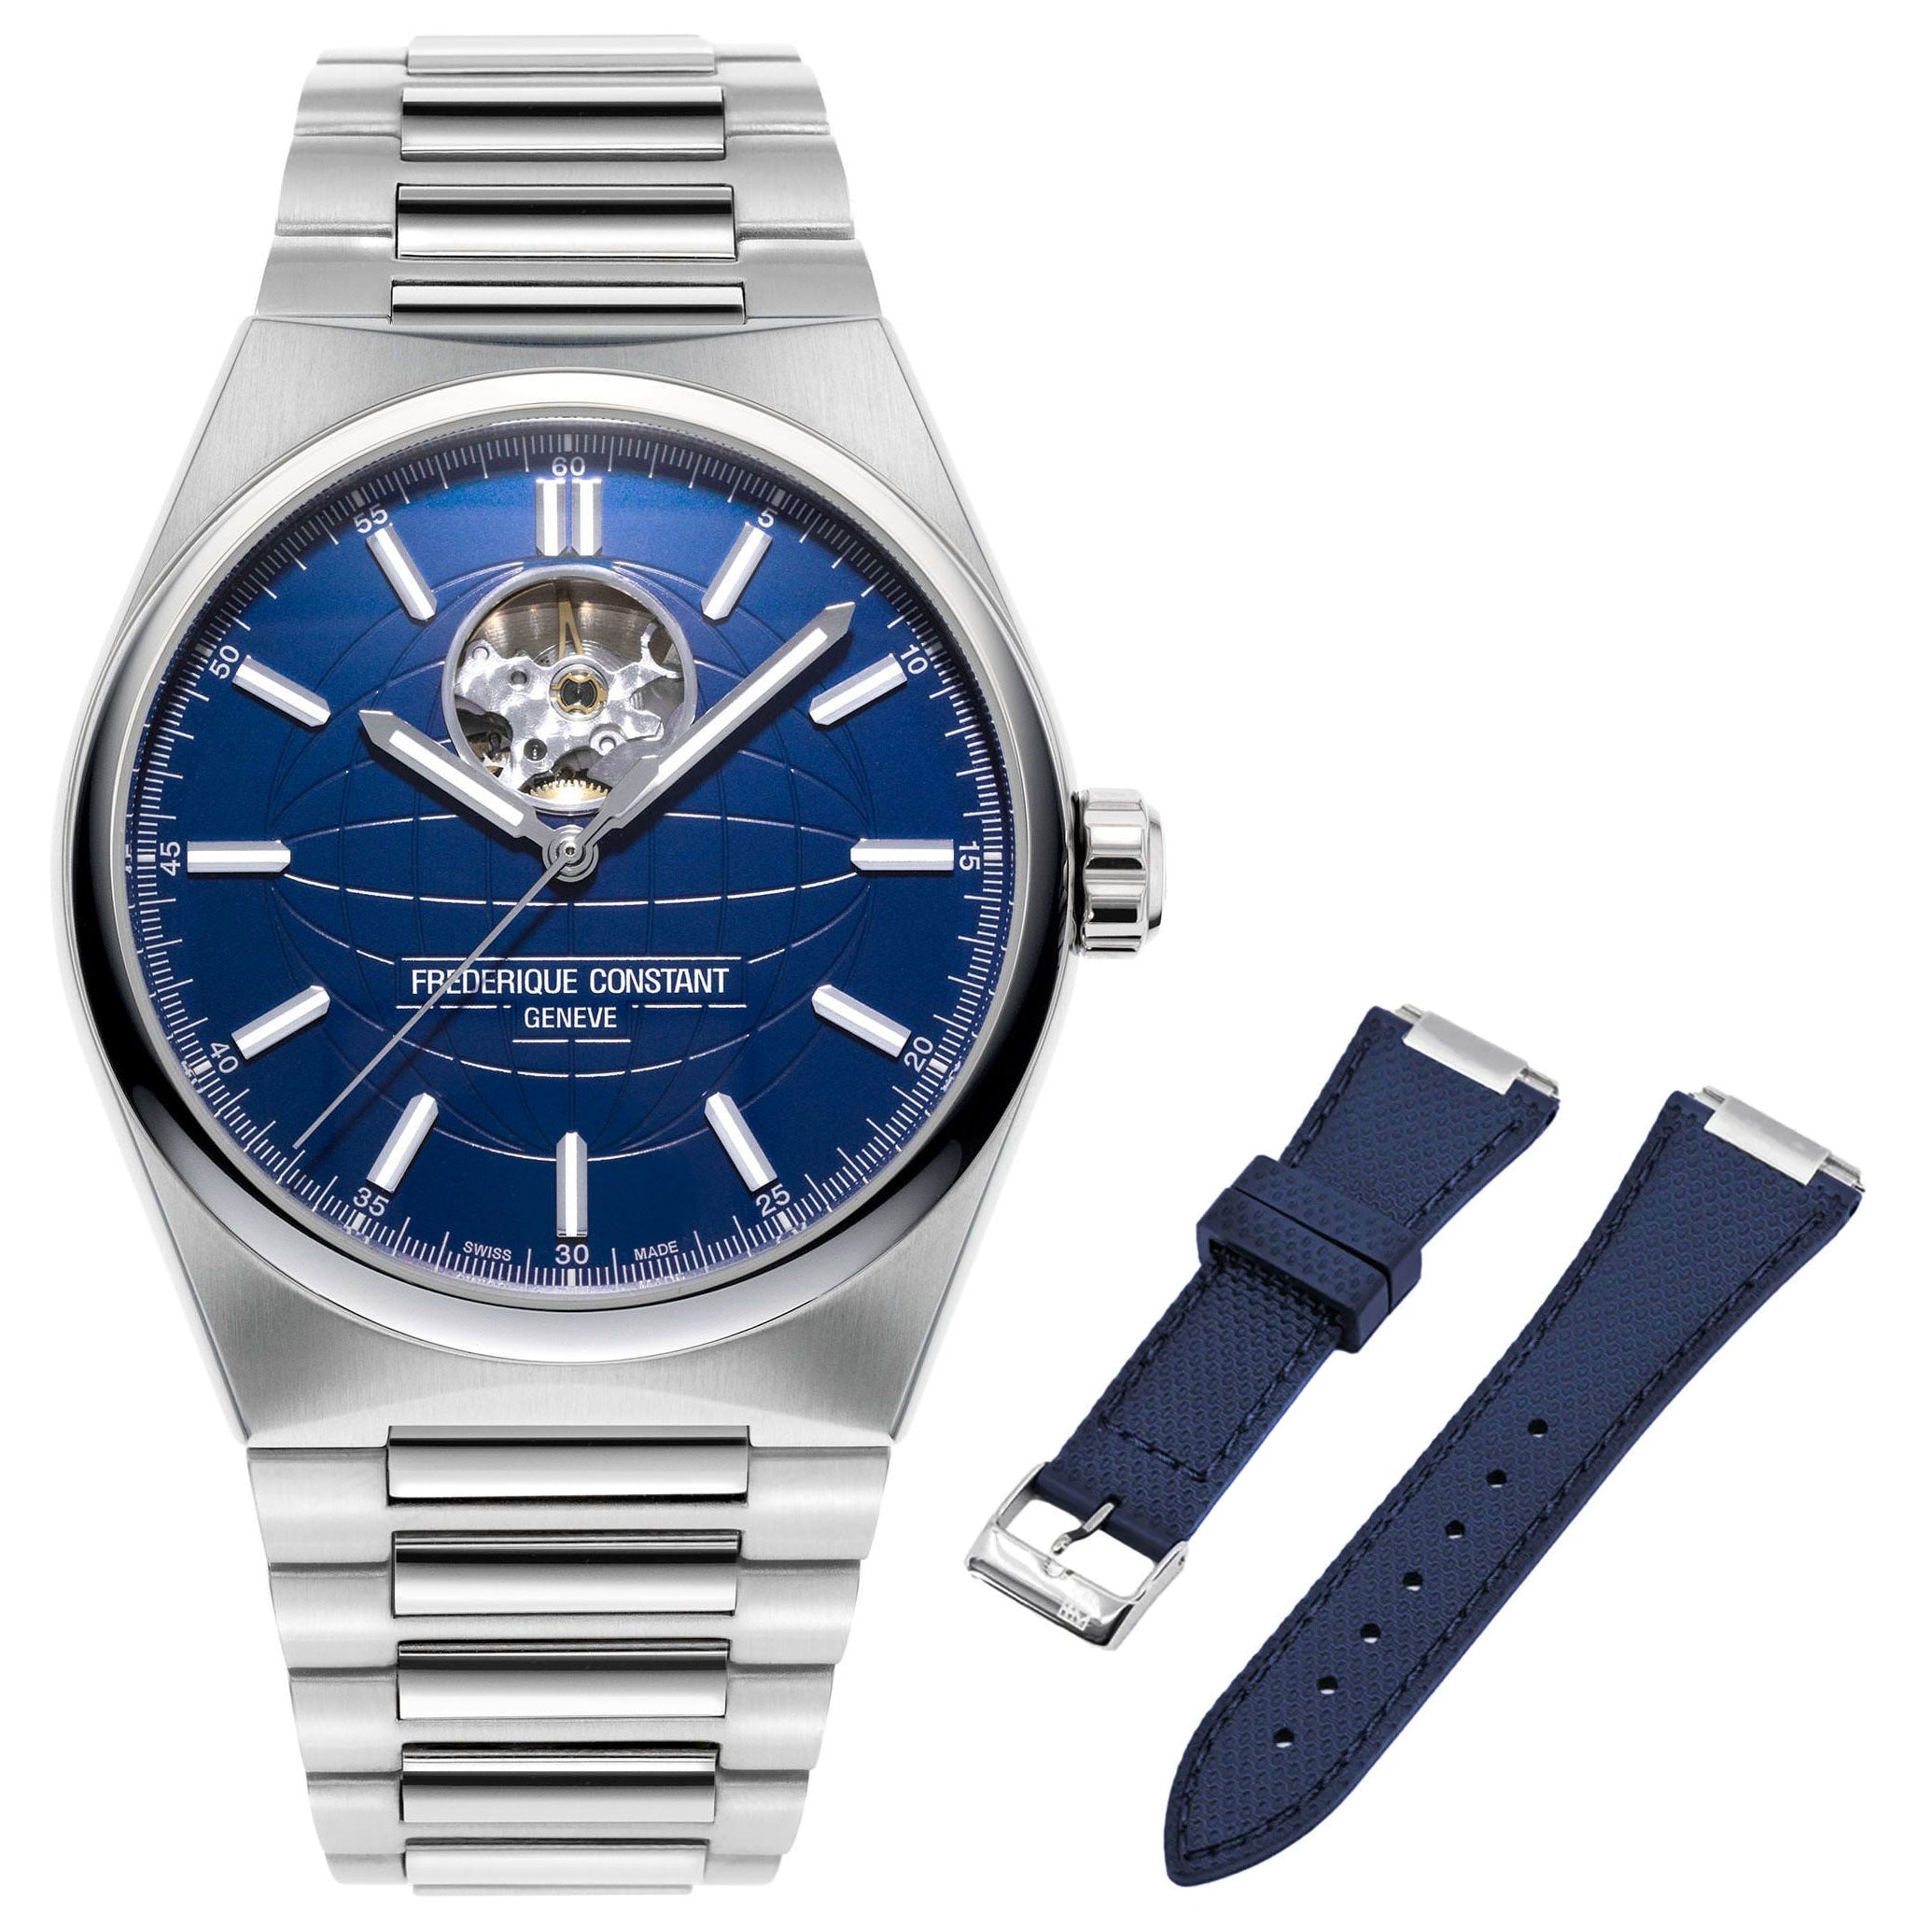 update alt-text with template Watches - Mens-Frederique Constant-FC-310N4NH6B-40 - 45 mm, blue, Frederique Constant, Highlife, interchangeable band, mens, menswatches, new arrivals, open heart, round, rpSKU_241813.2, rpSKU_FC-220NS5B6B, rpSKU_FC-330MC4P6B, rpSKU_FC-392RMG5B6, rpSKU_FC-750V4H6, rubber, stainless steel band, stainless steel case, swiss automatic, watches-Watches & Beyond